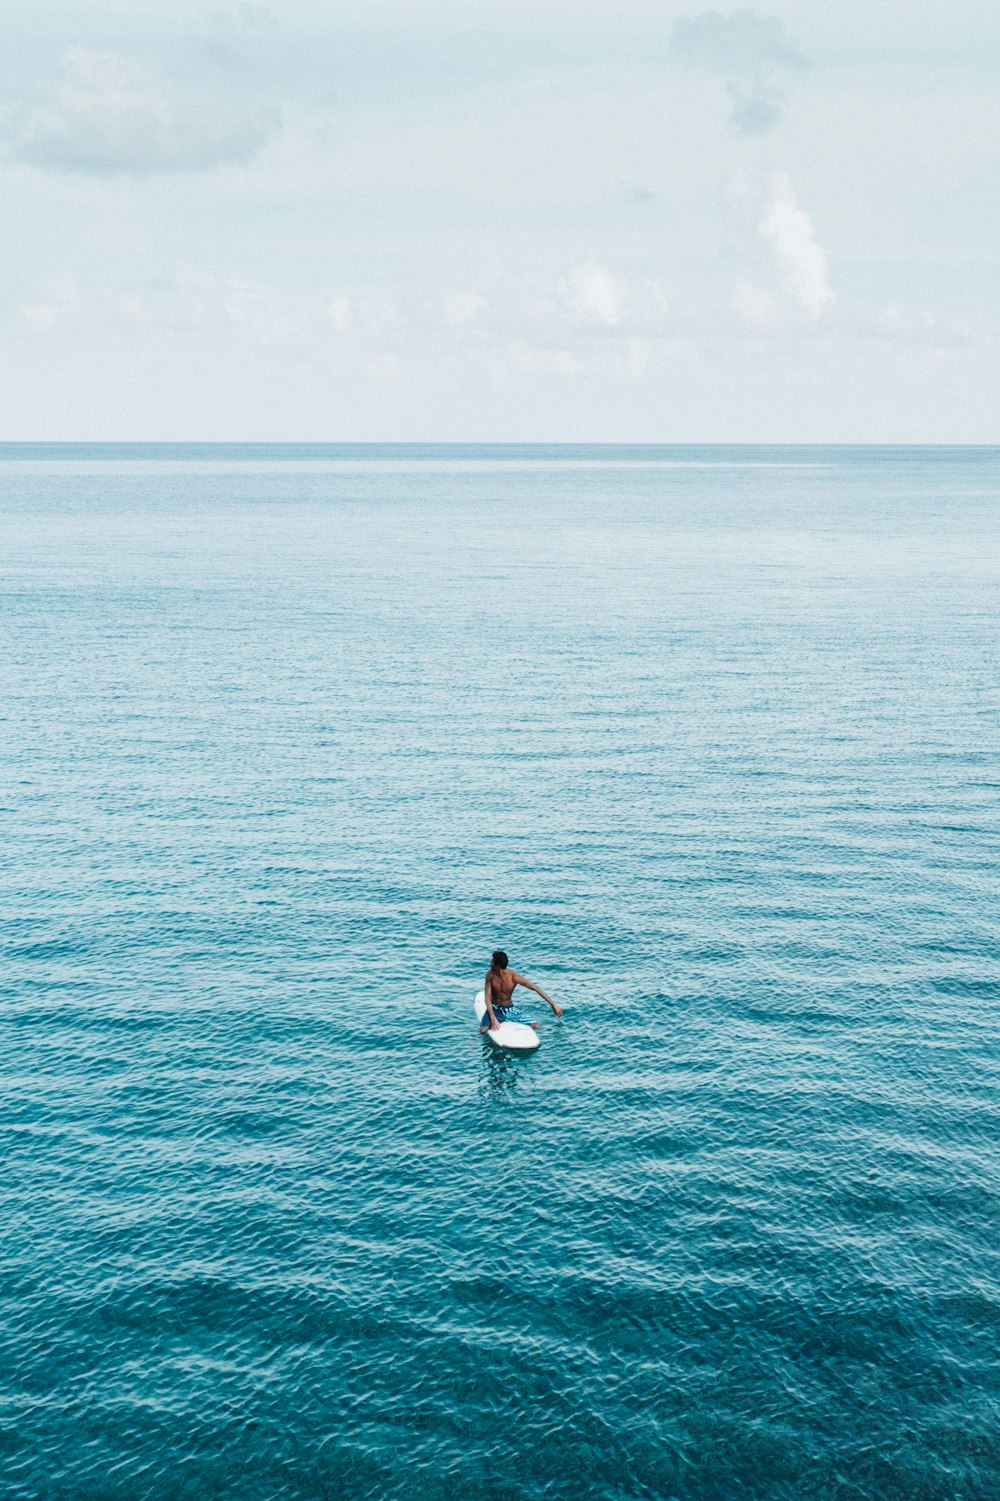 woman in white shirt and black pants surfing on sea during daytime